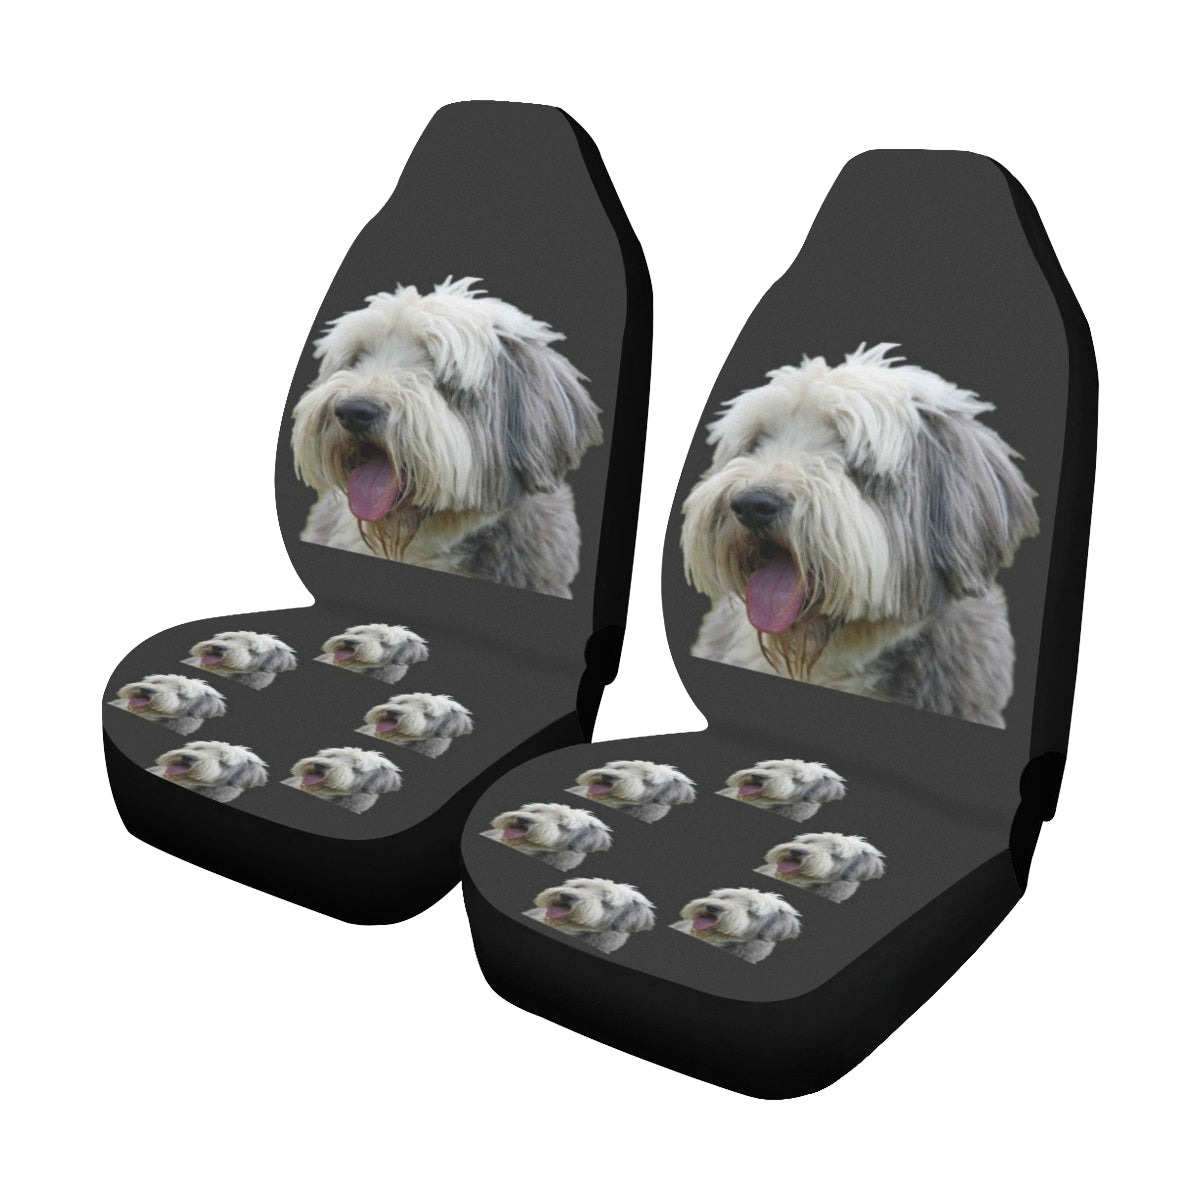 Bearded Collie Car Seat Covers (Set of 2)